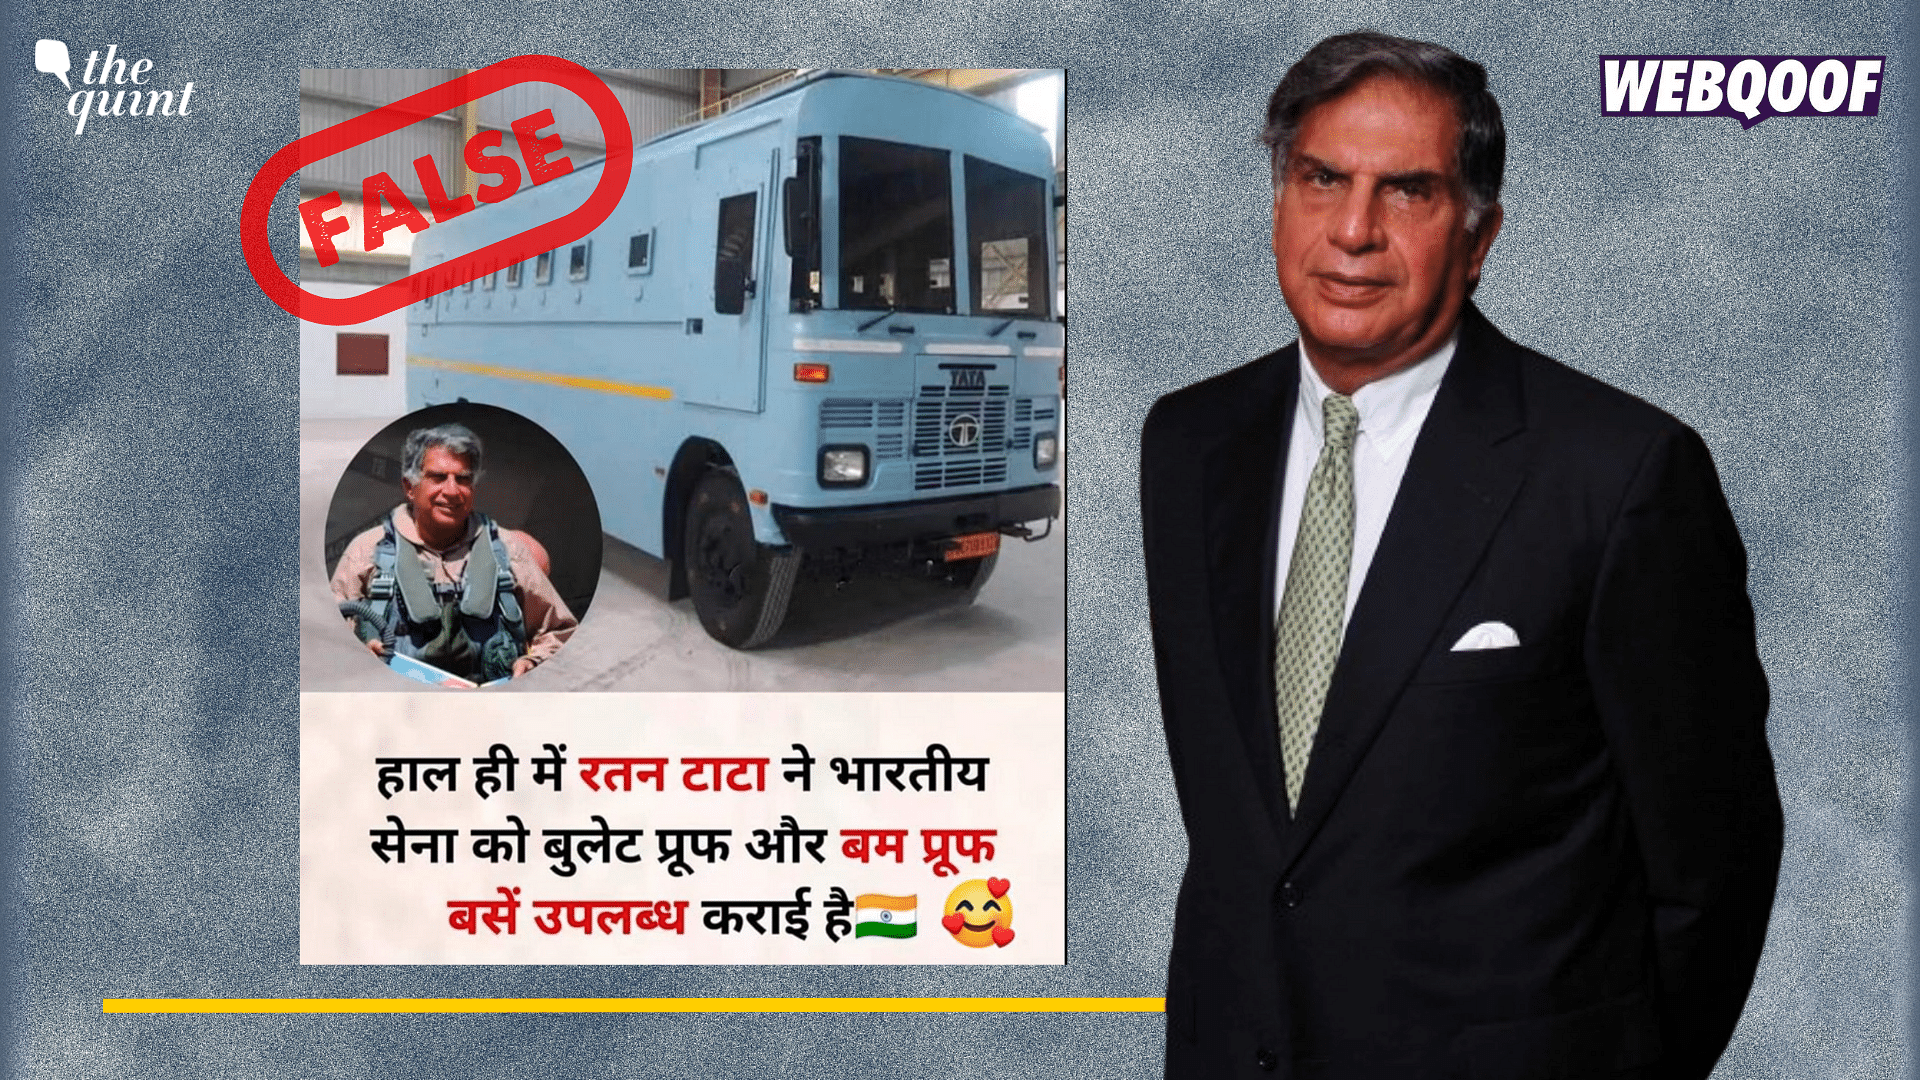 <div class="paragraphs"><p>Fact-Check: This claim is false. The image of the bus dates back to 2017 when the MIDHANI group provided the CRPF with bulletproof buses.&nbsp;</p></div>